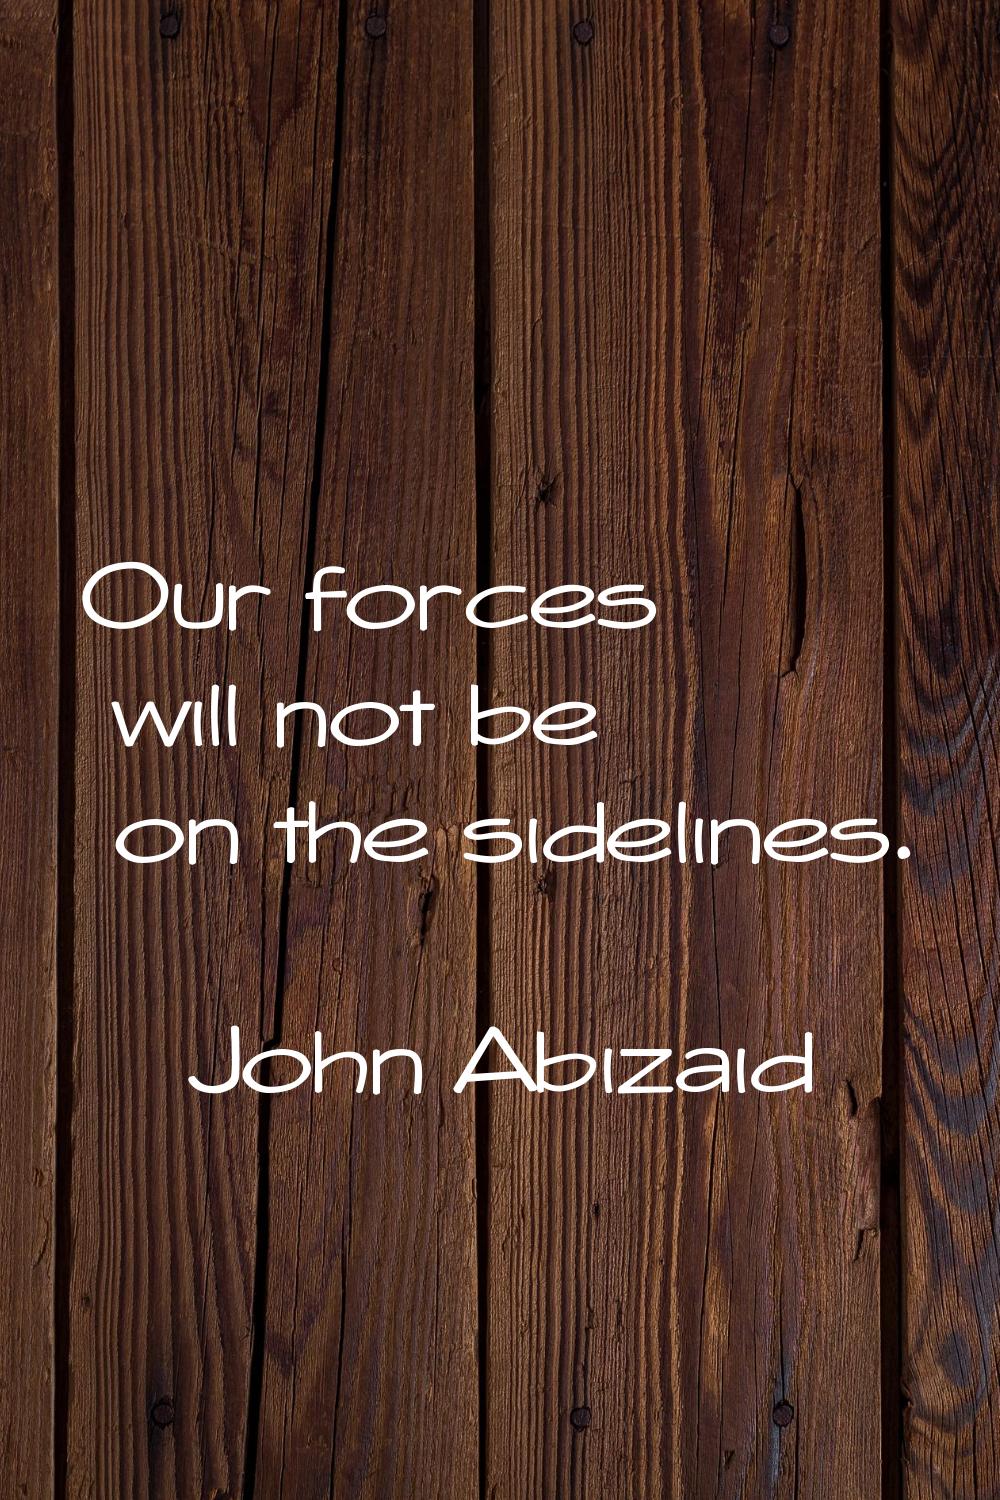 Our forces will not be on the sidelines.